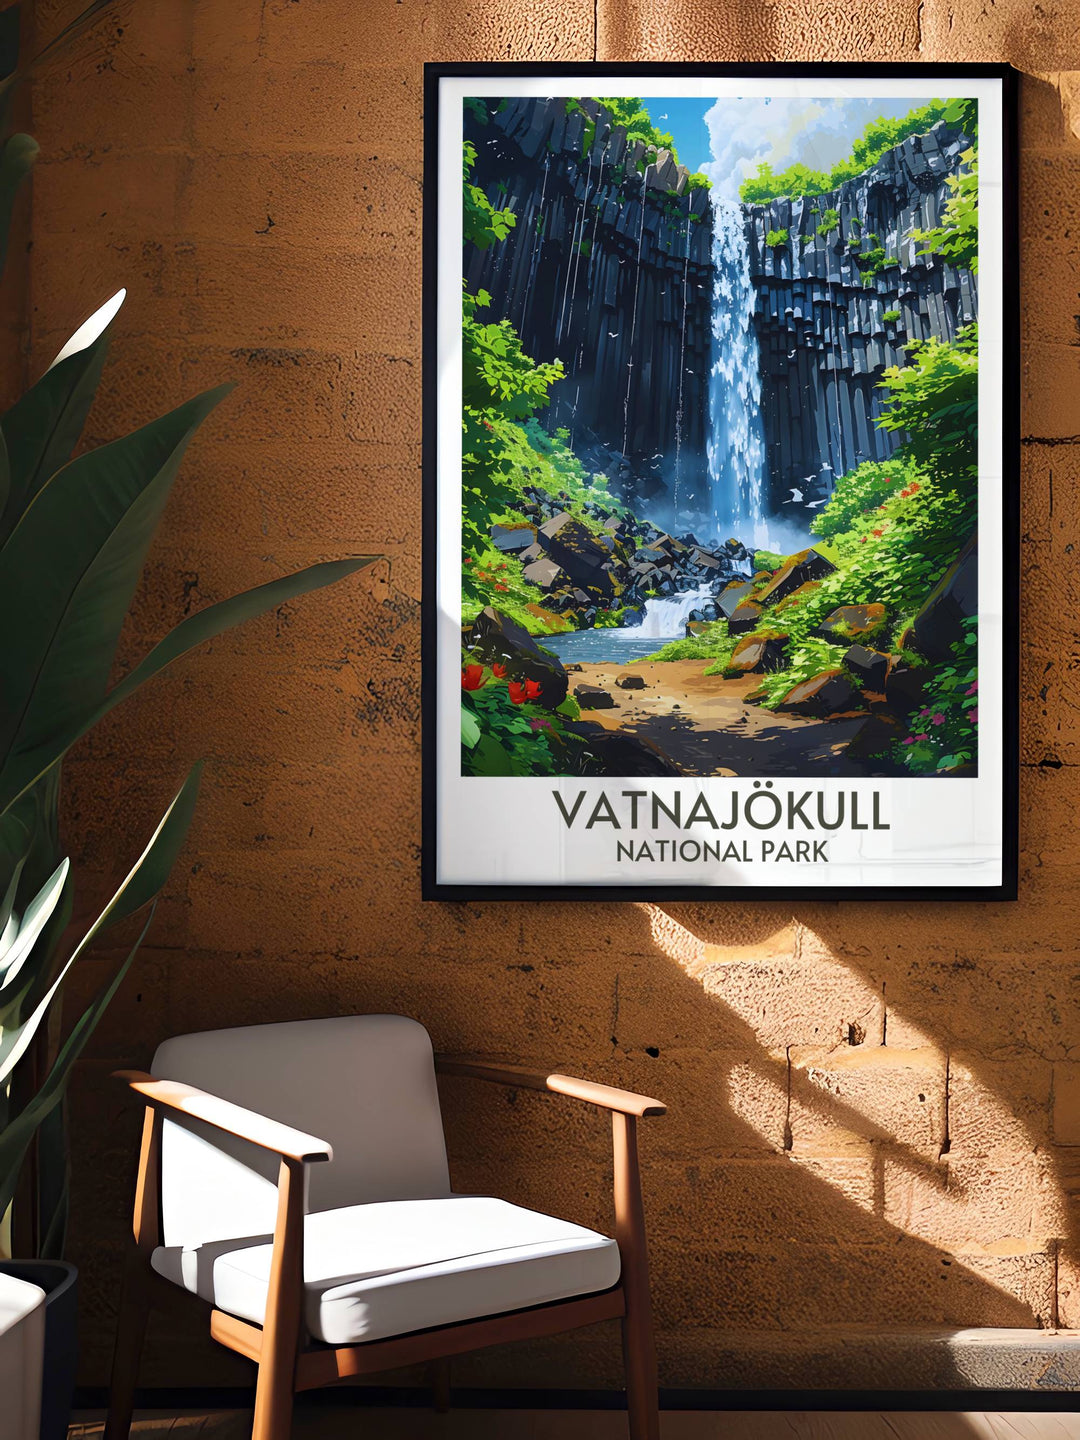 Svartifoss Waterfall in Vatnajökull National Park Iceland detailed canvas art featuring the natural beauty of the basalt columns and cascading water ideal for nature lovers.